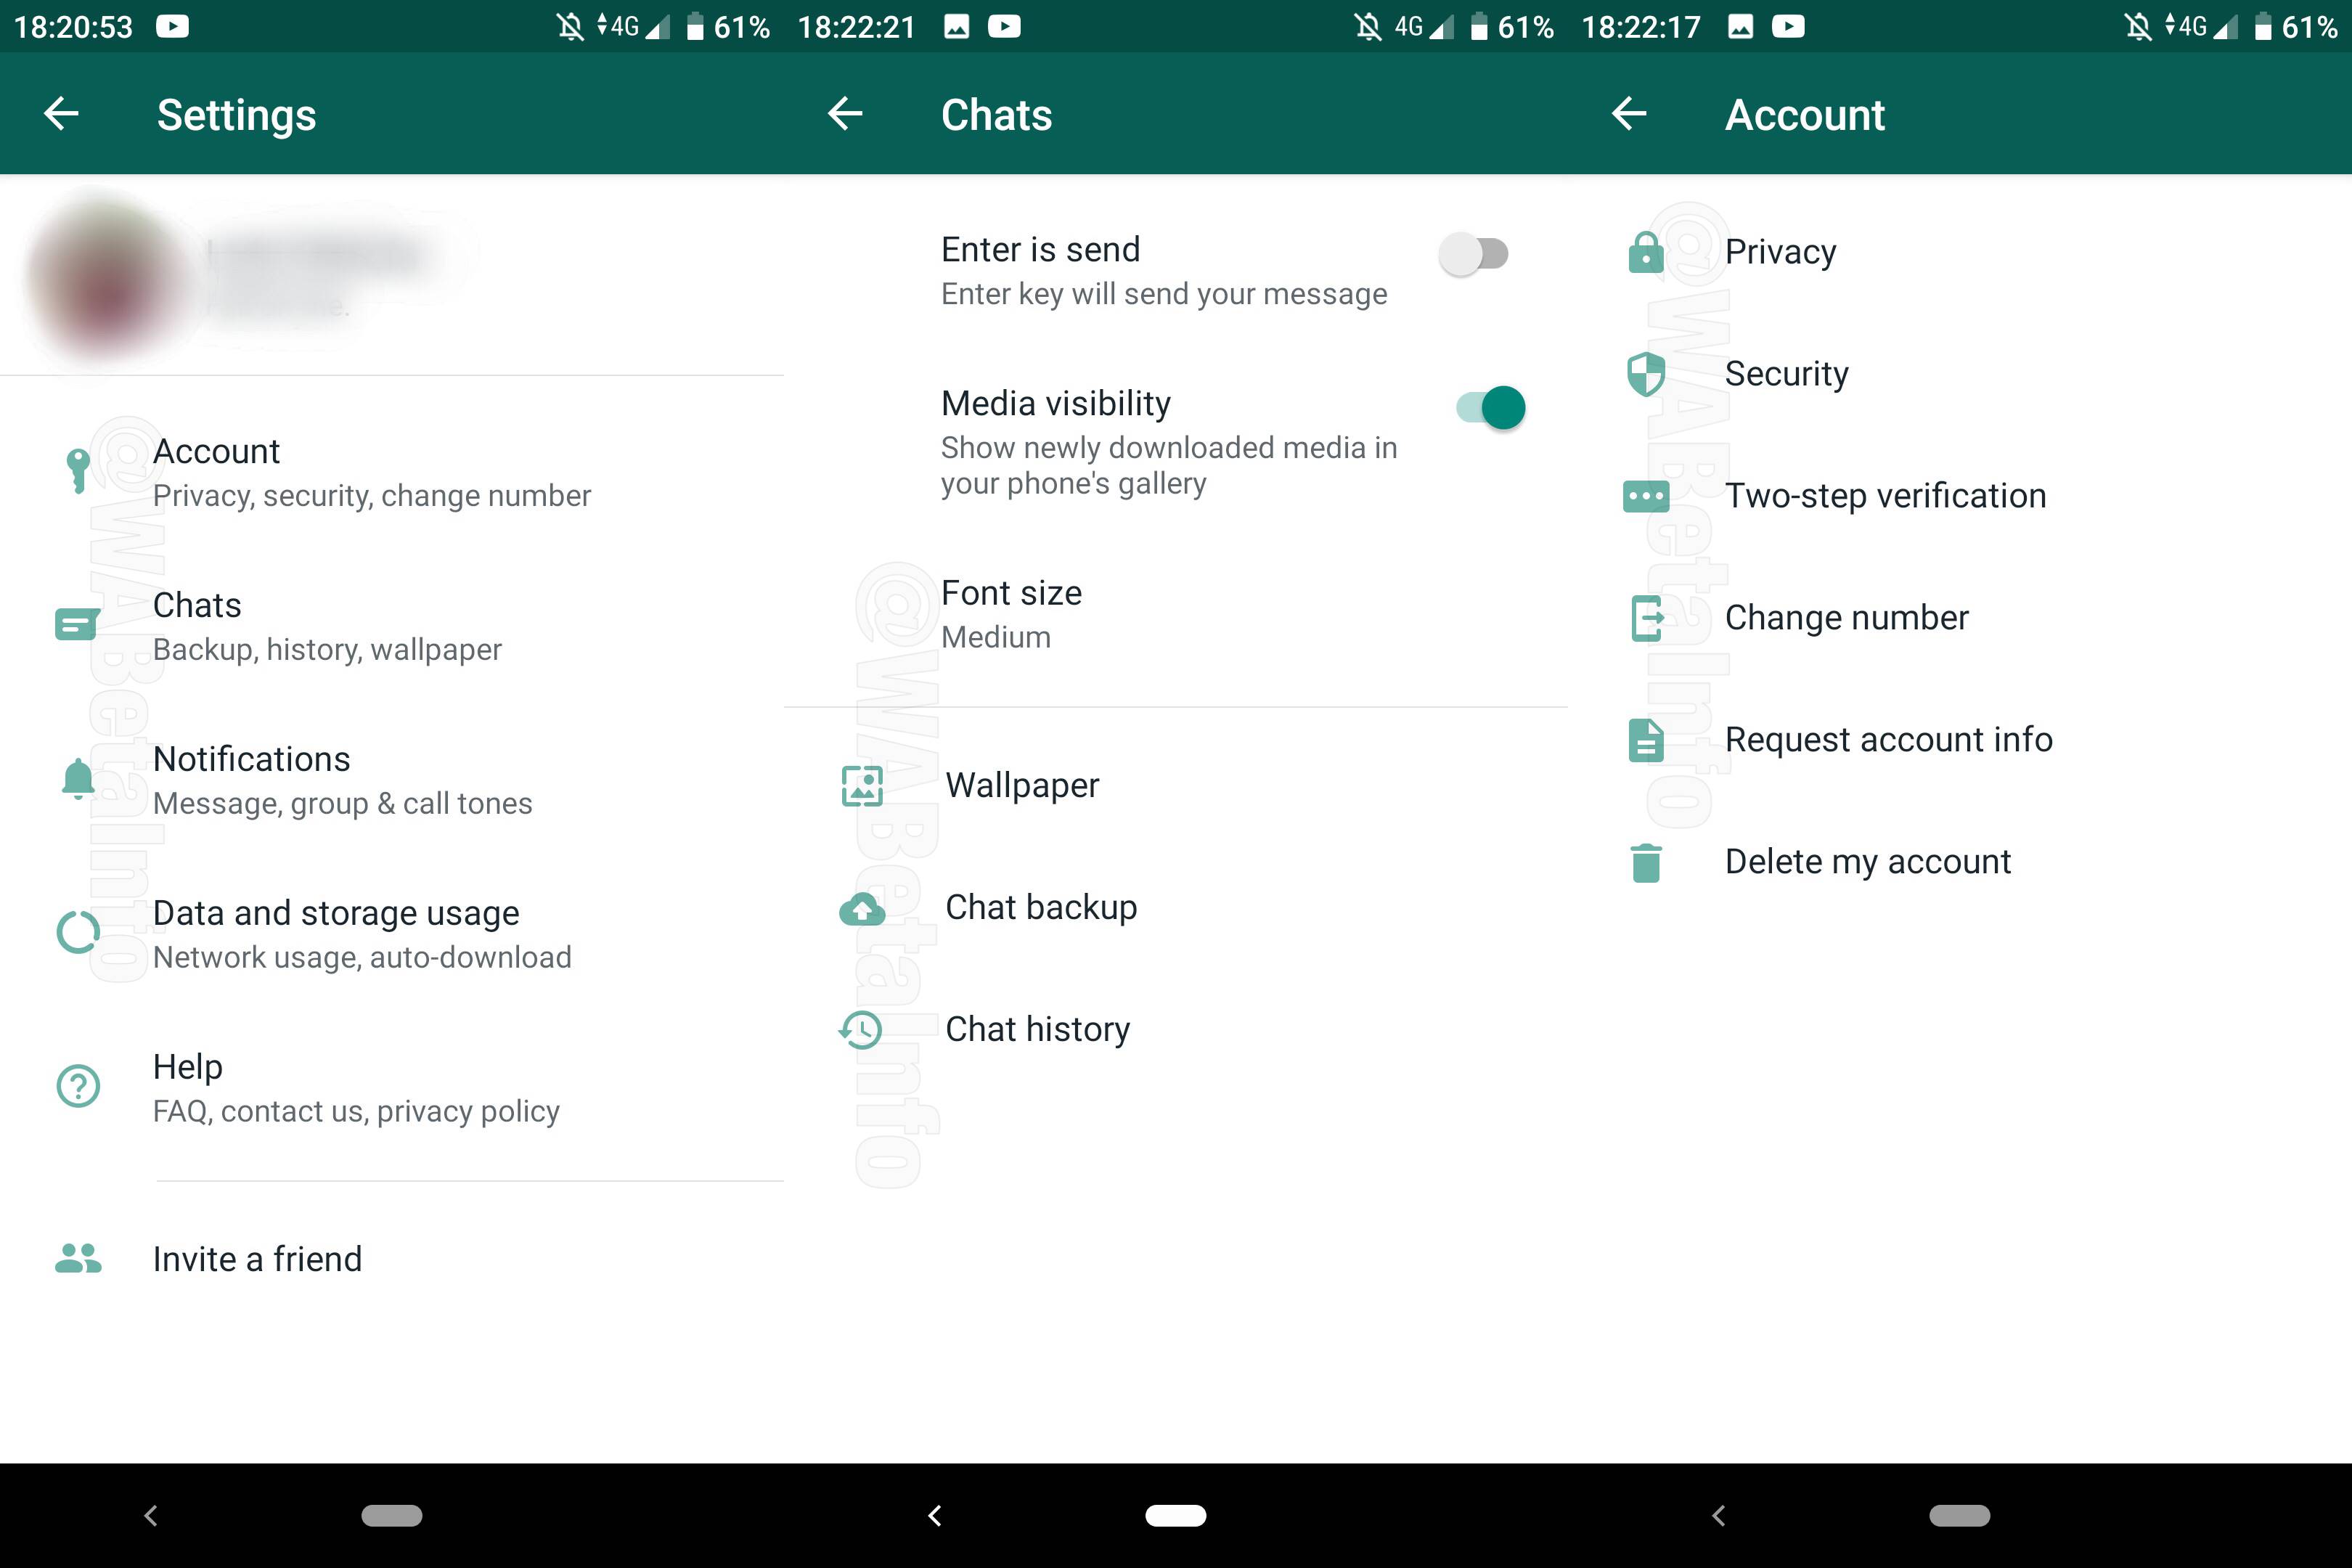 WhatsApp android interface